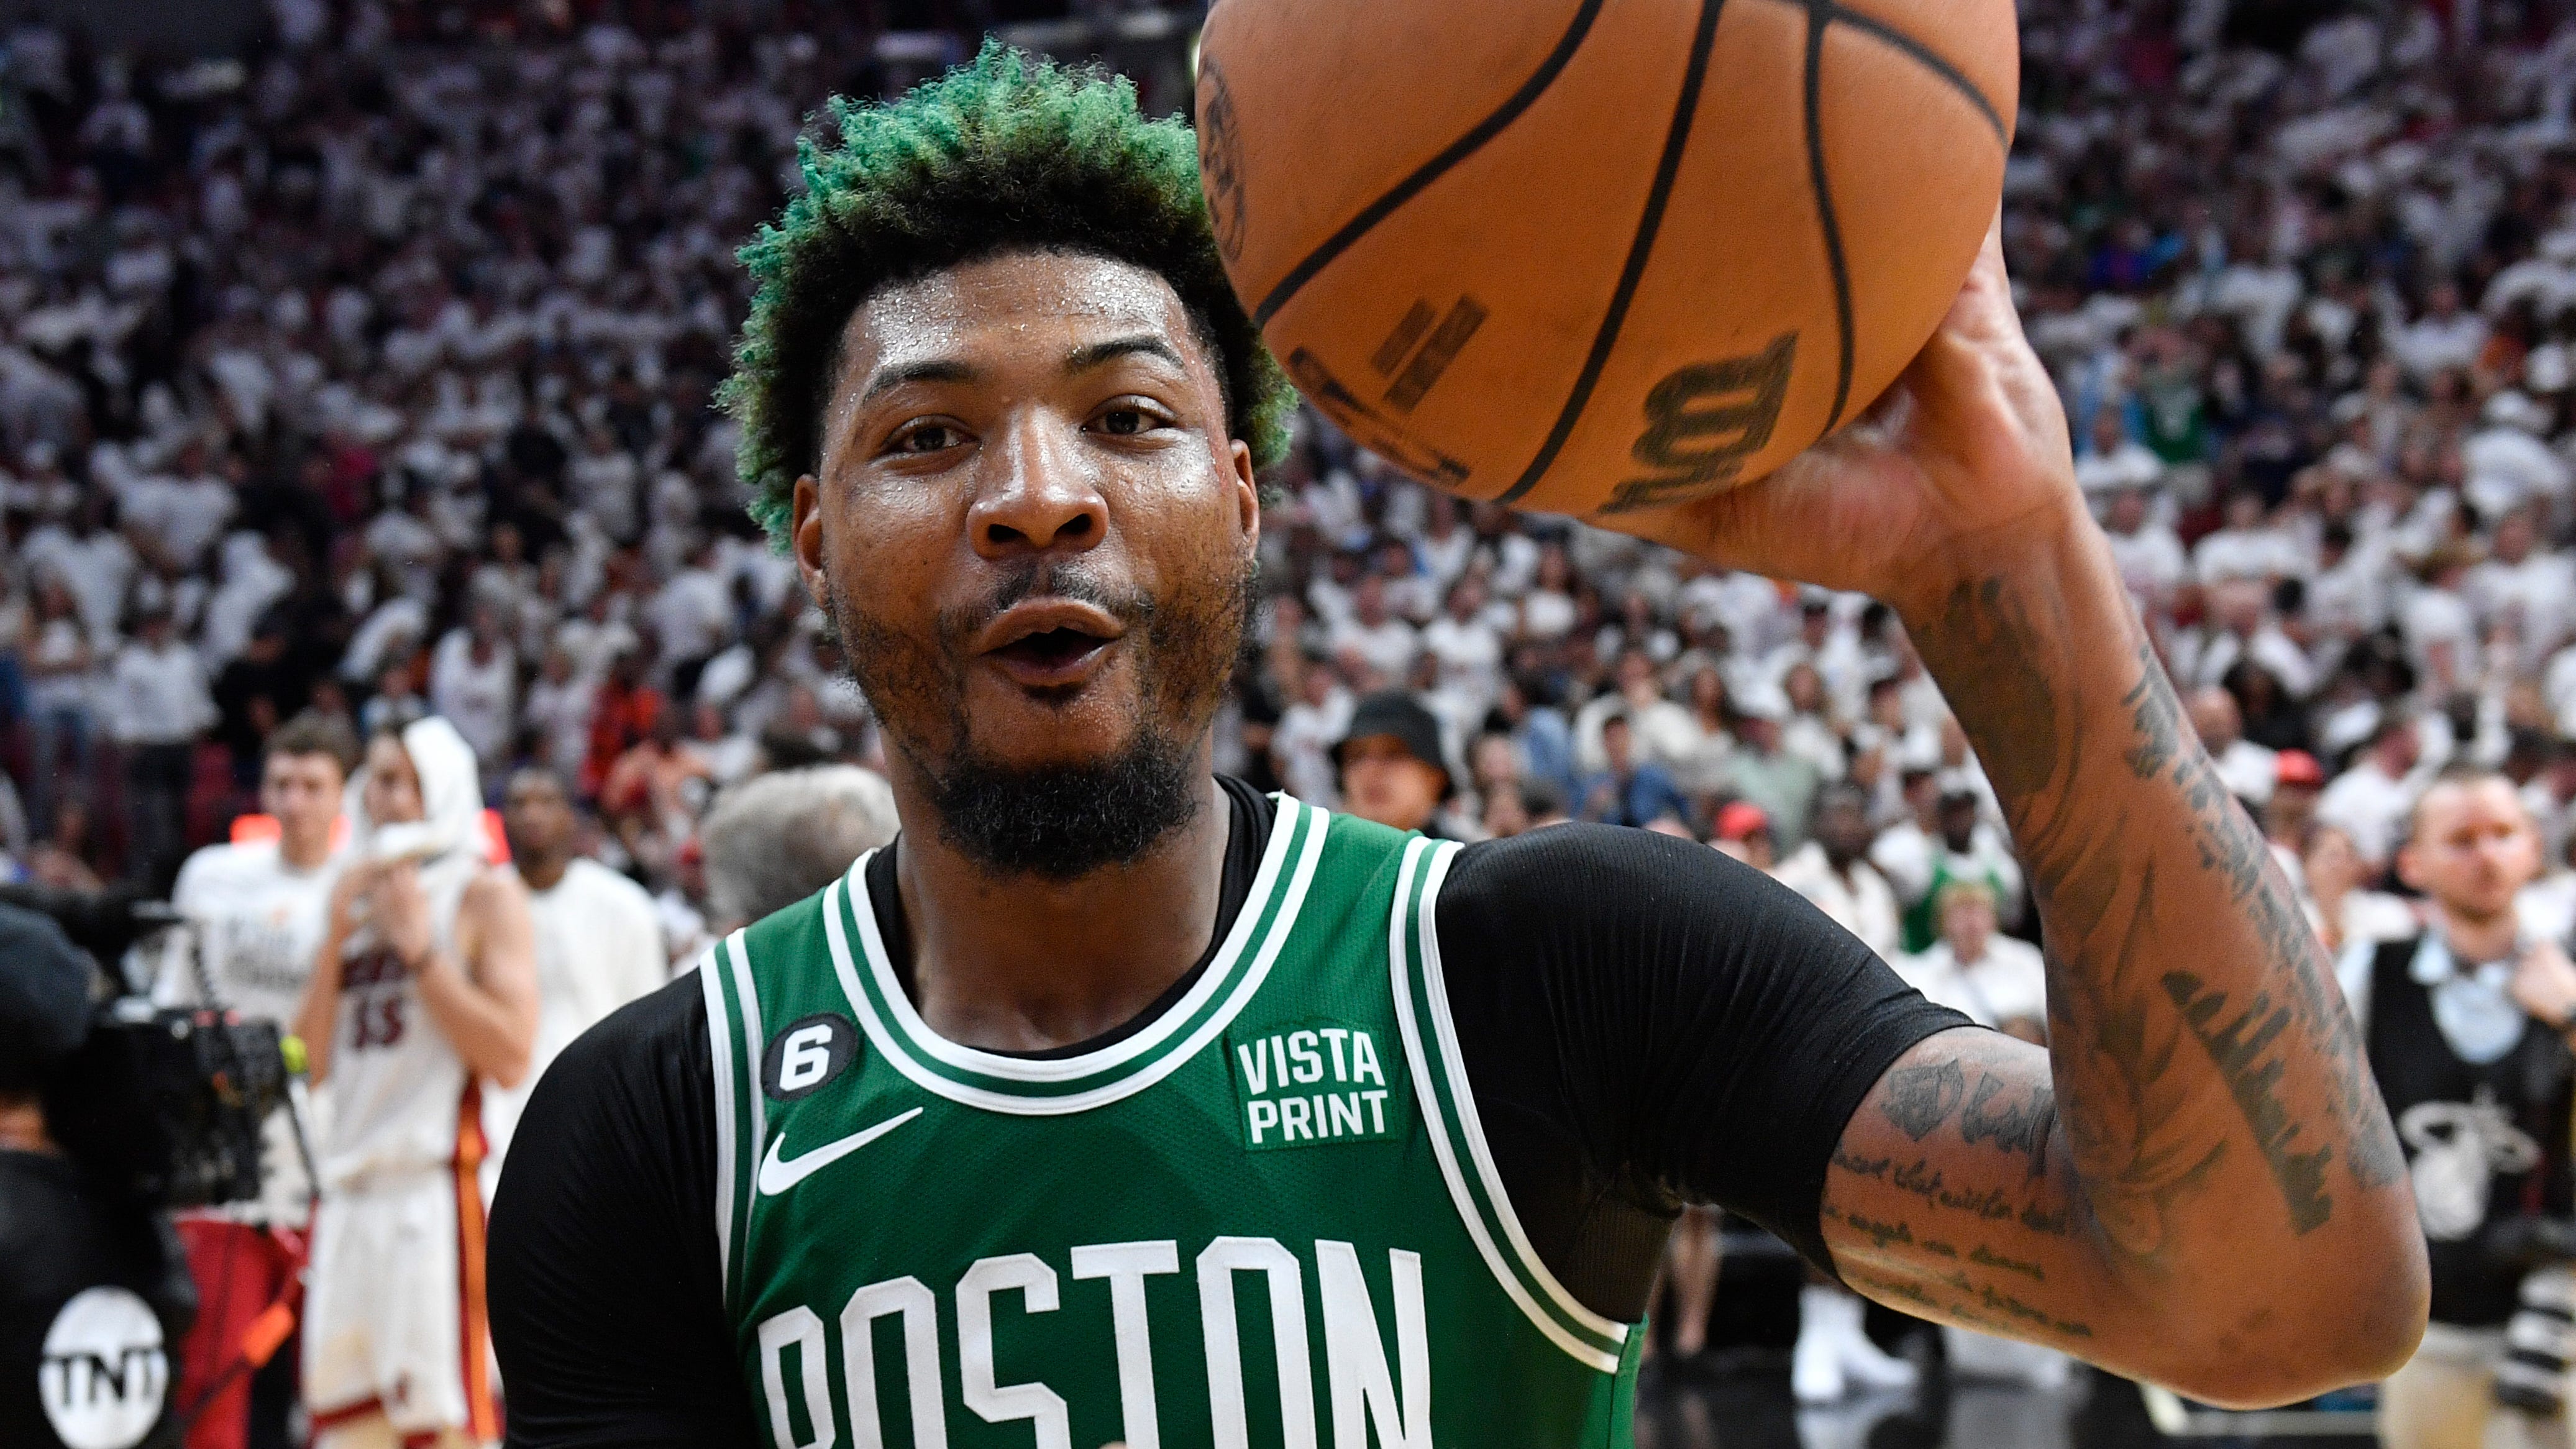 Marcus Smart celebrates after the Boston Celtics defeated the Miami Heat in Game 6 of the Eastern Conference Finals.